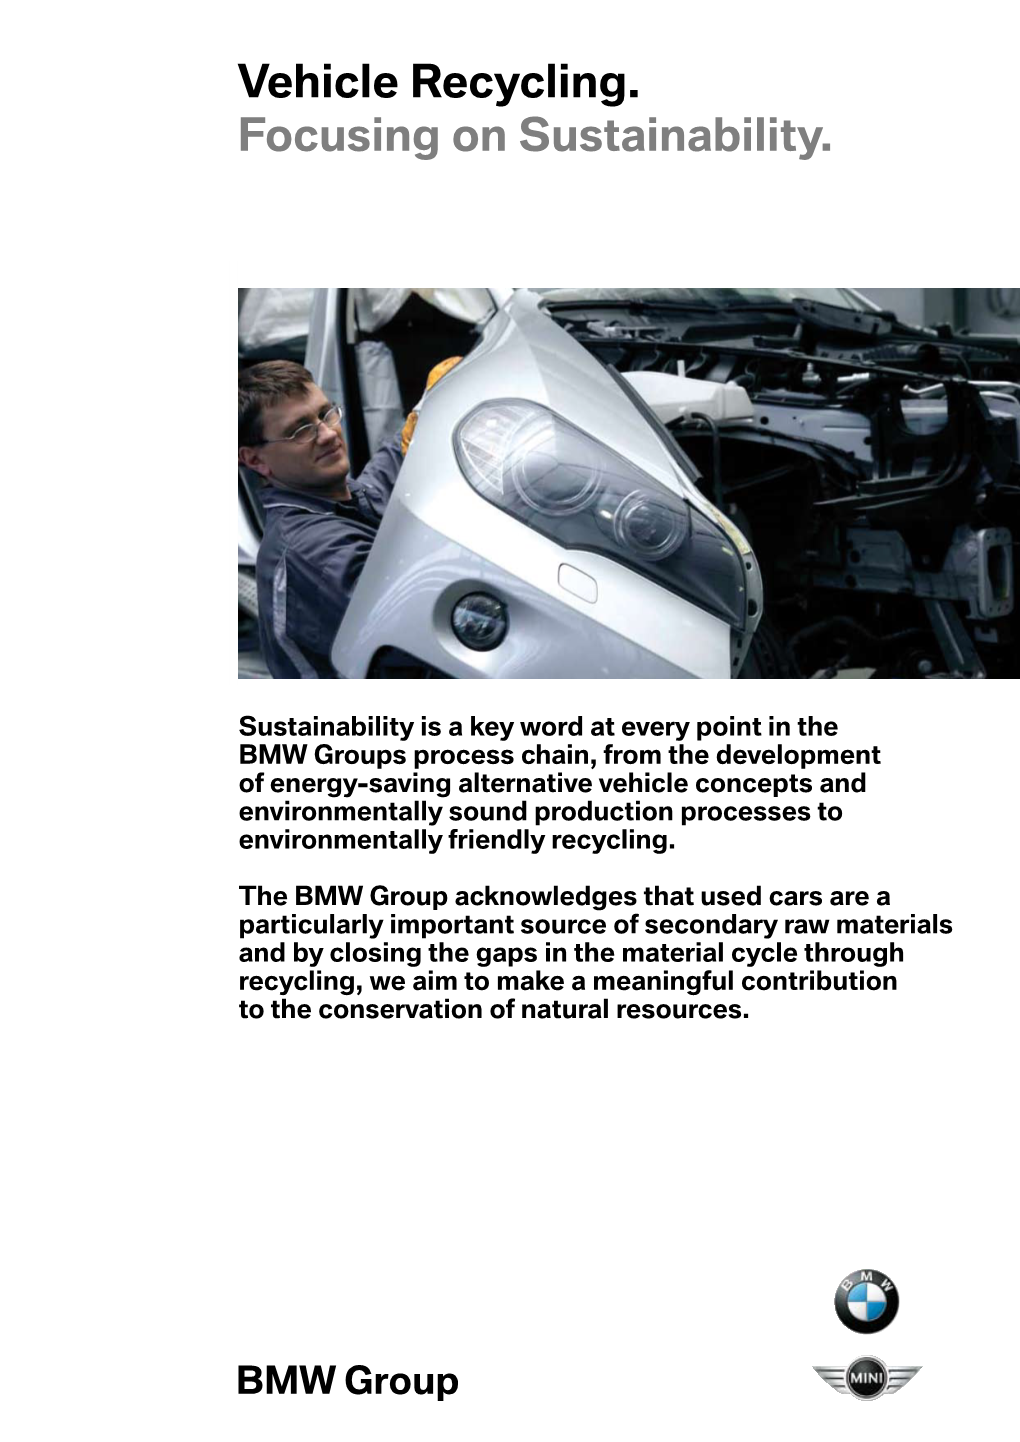 Vehicle Recycling. Focusing on Sustainability